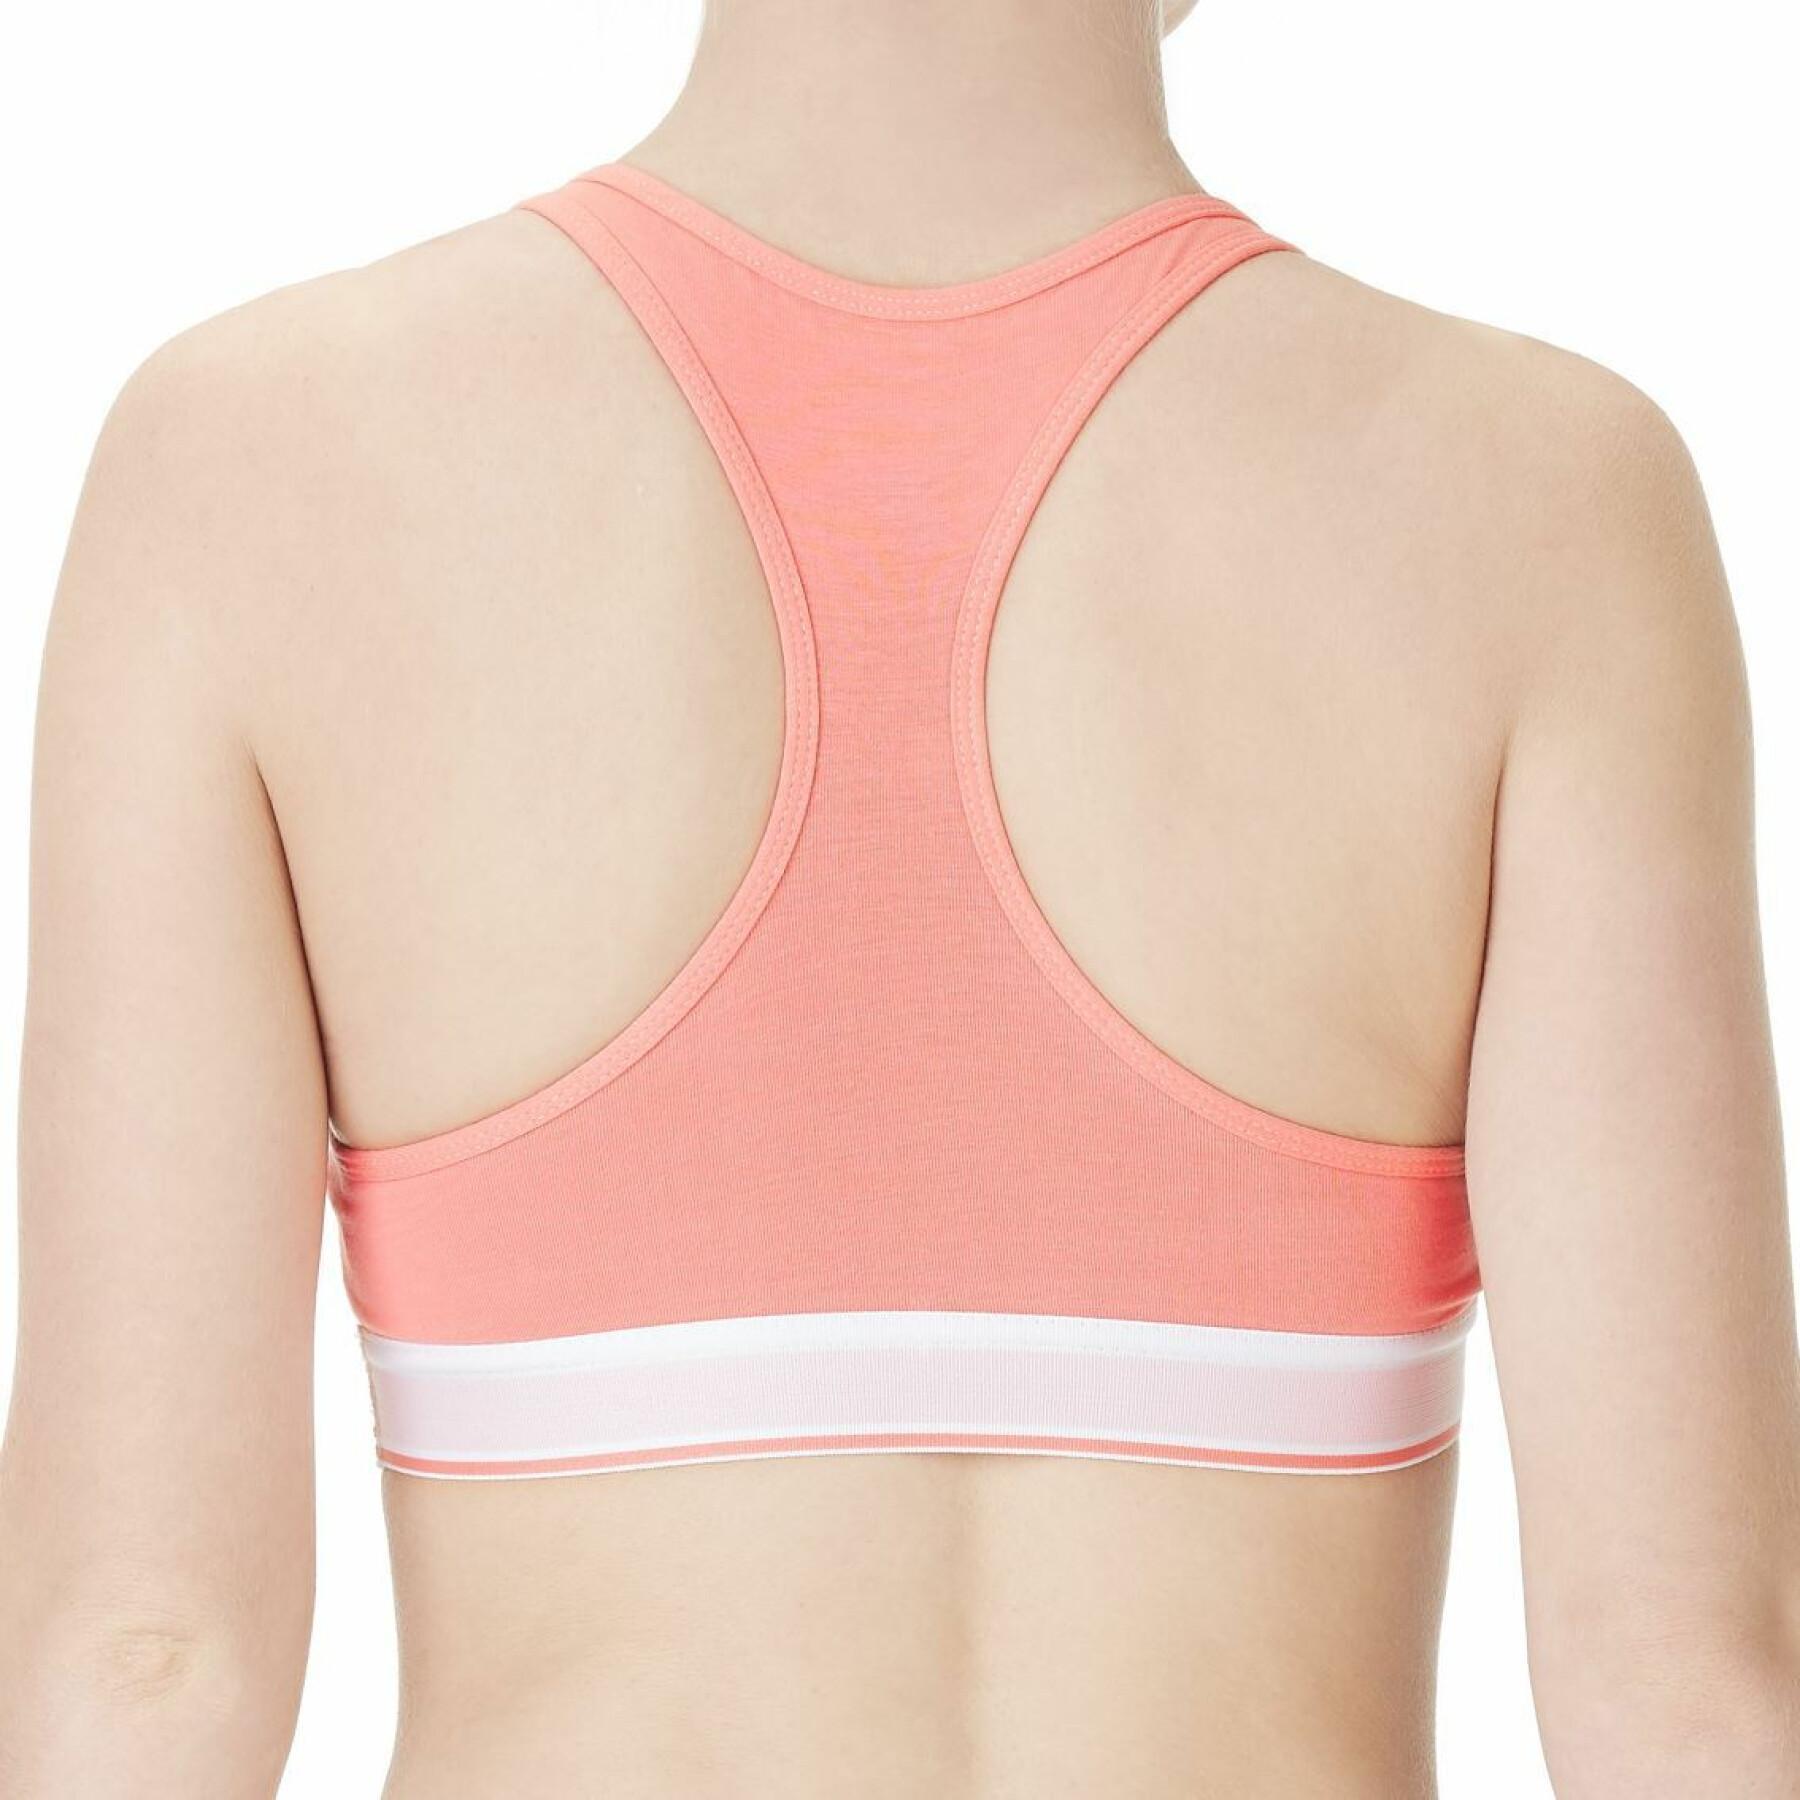 Bra with removable pads for women Reebok Grace